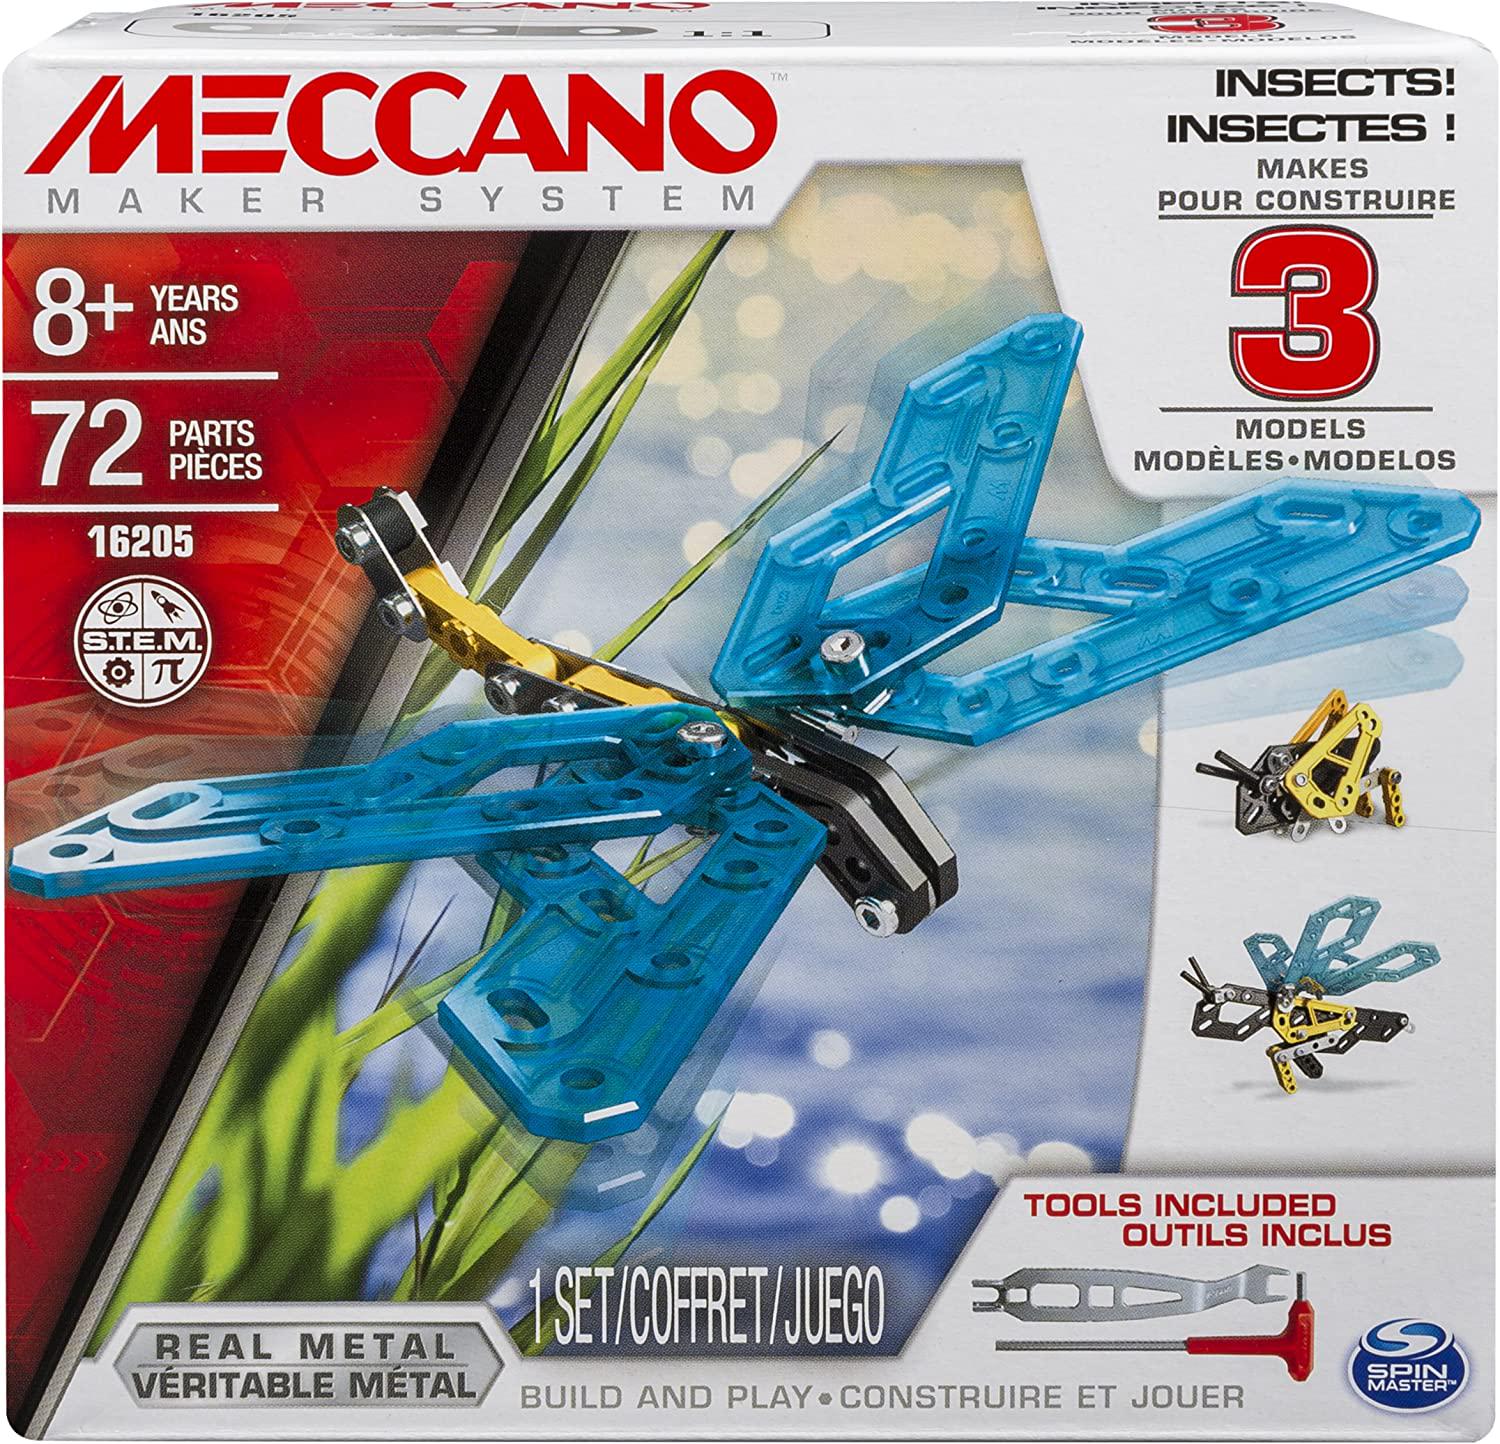 MECCANO, Meccano, 3 Model Building Set, Insects, 72 Pieces, for Ages 8+, STEM Construction Education Toy